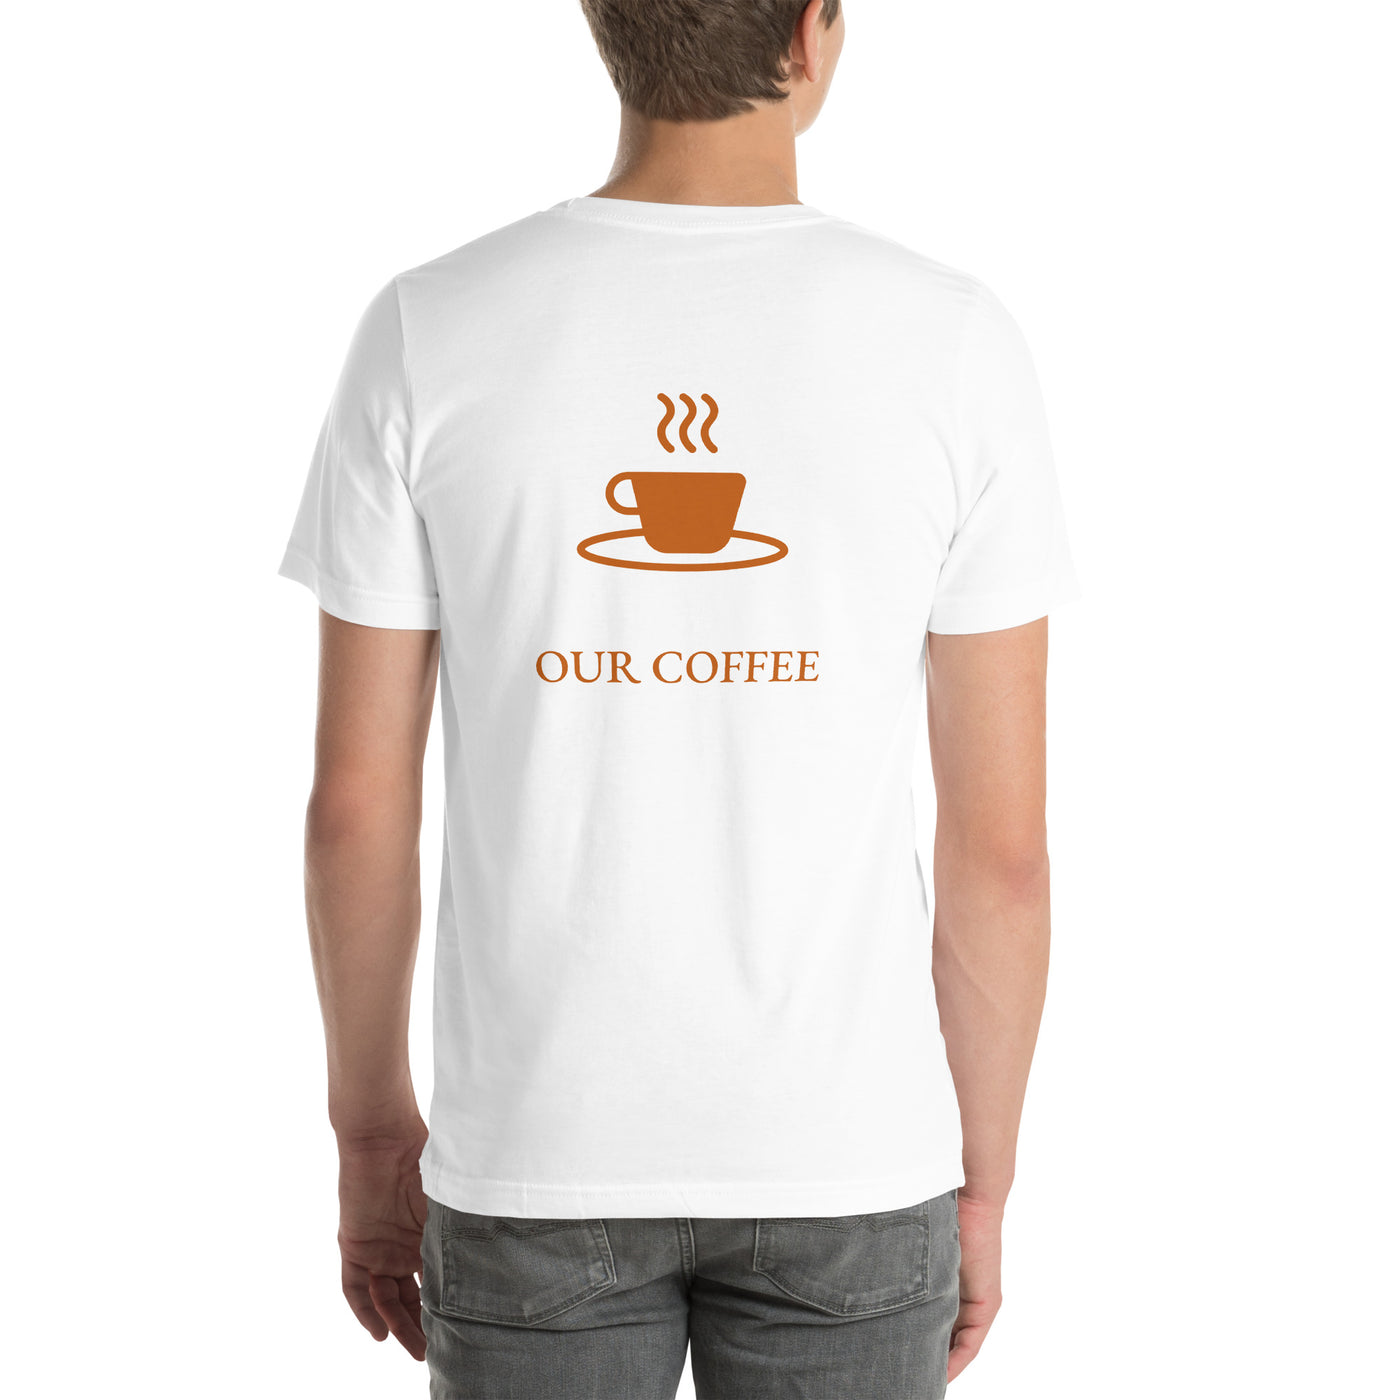 In cryptography, we trust... our coffee (Orange Text) - Unisex t-shirt ( Back Print )